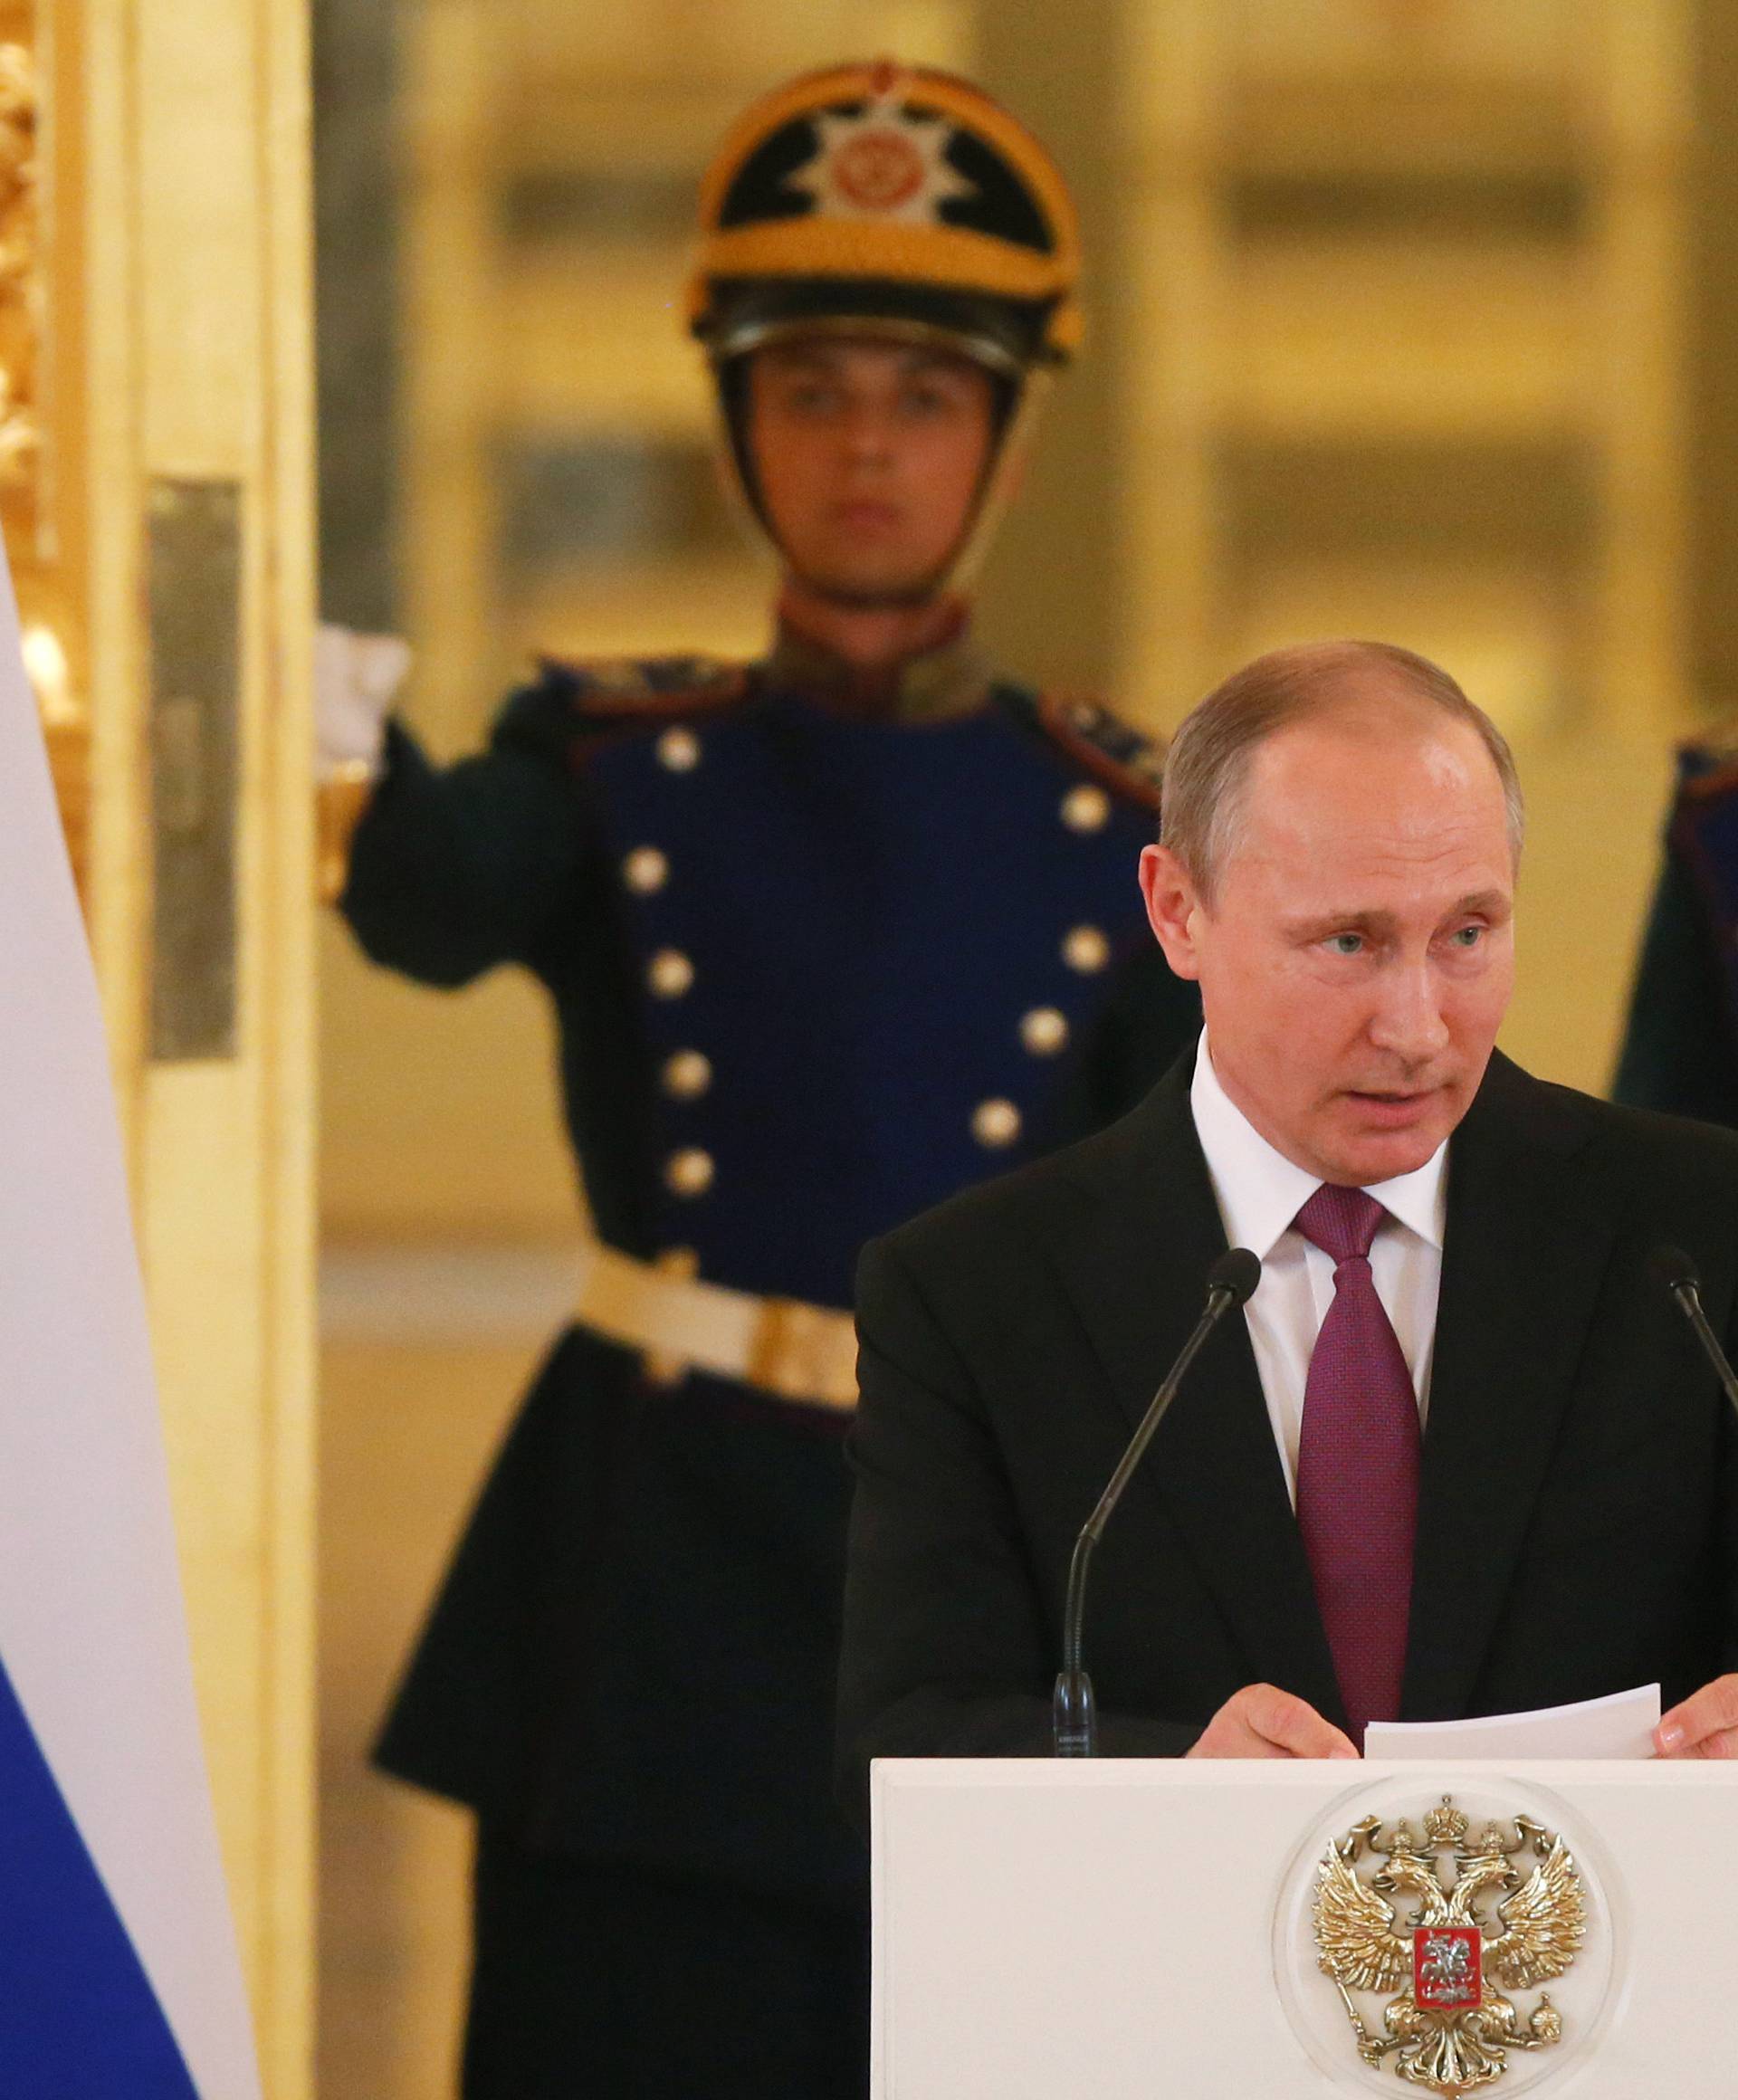 Russian President Putin speaks during personal send-off for members of Russian Olympic team at Kremlin in Moscow